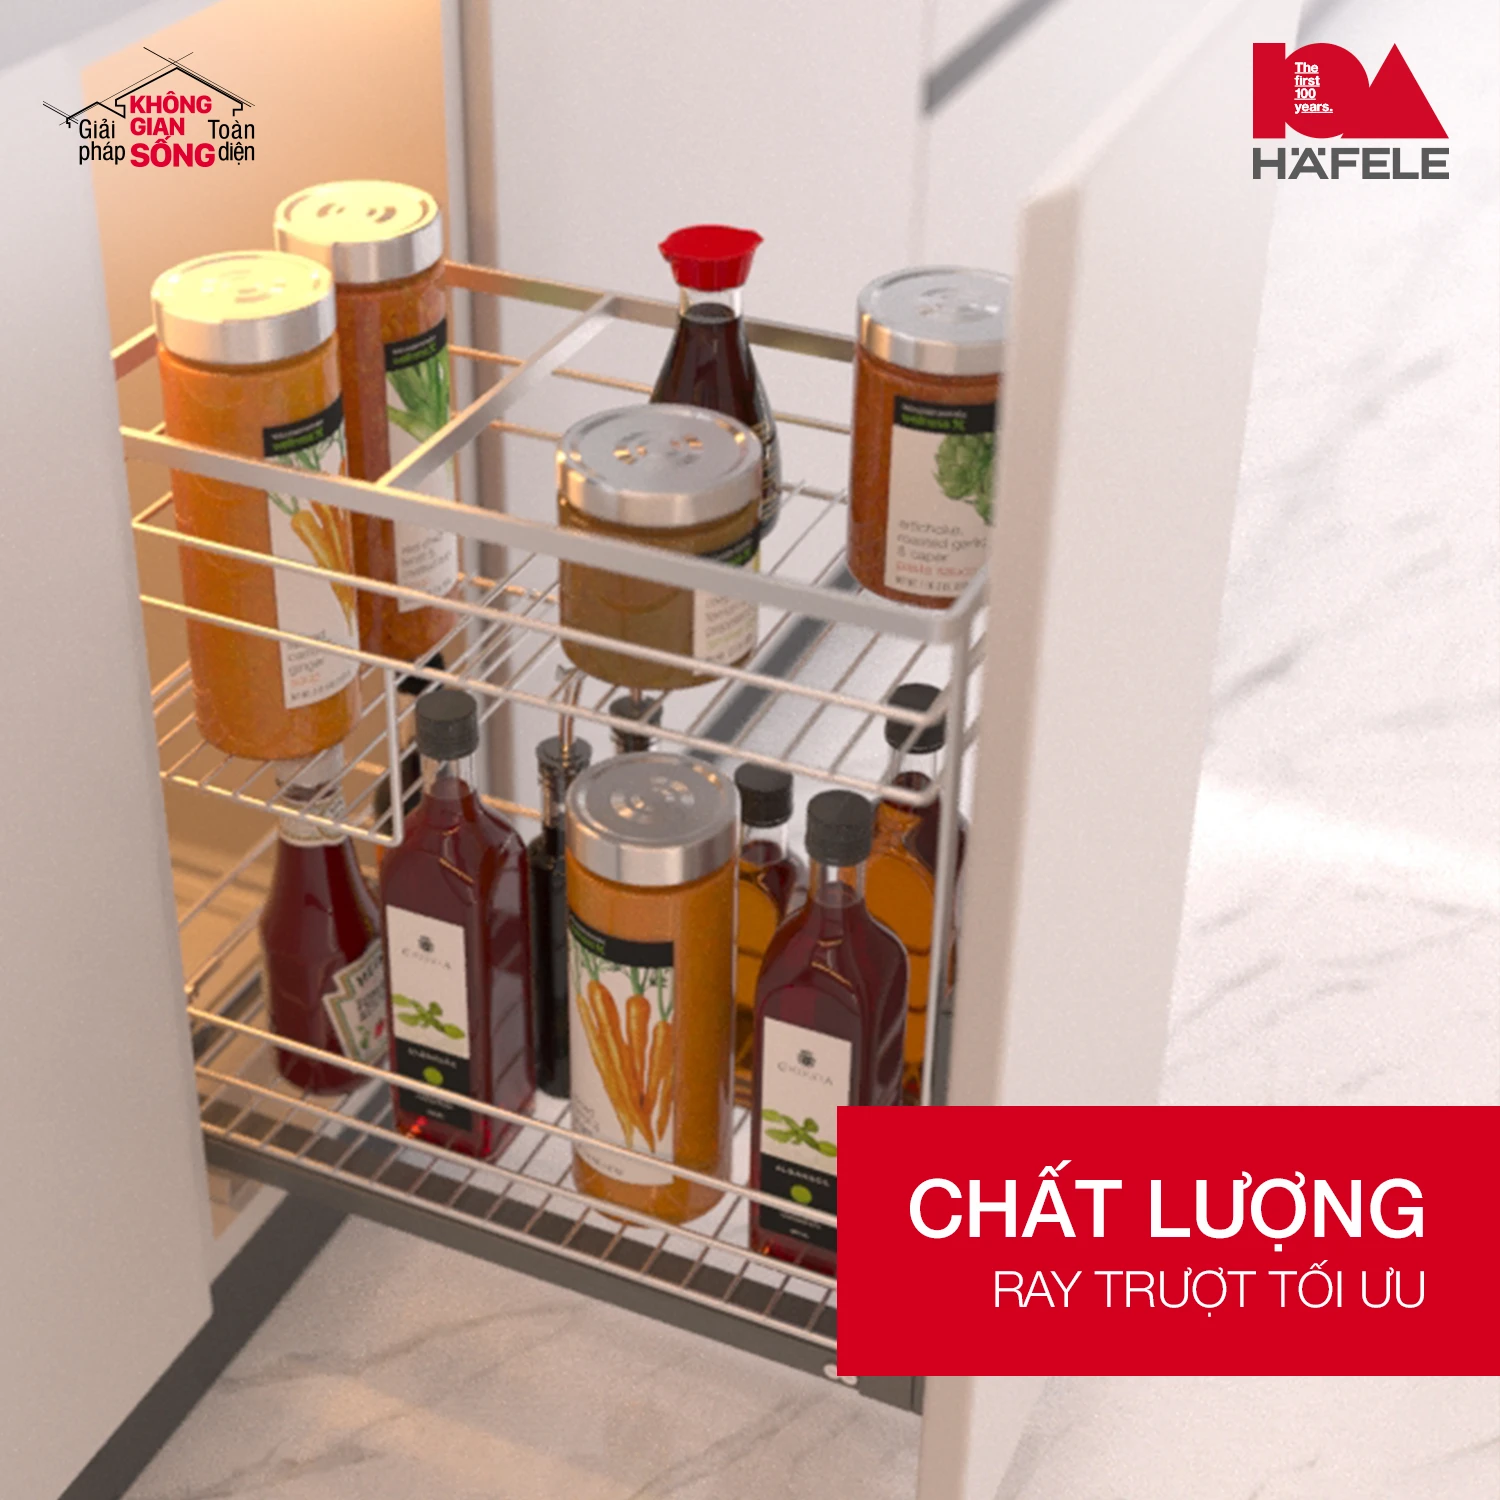 chat luong ray truot toi uu